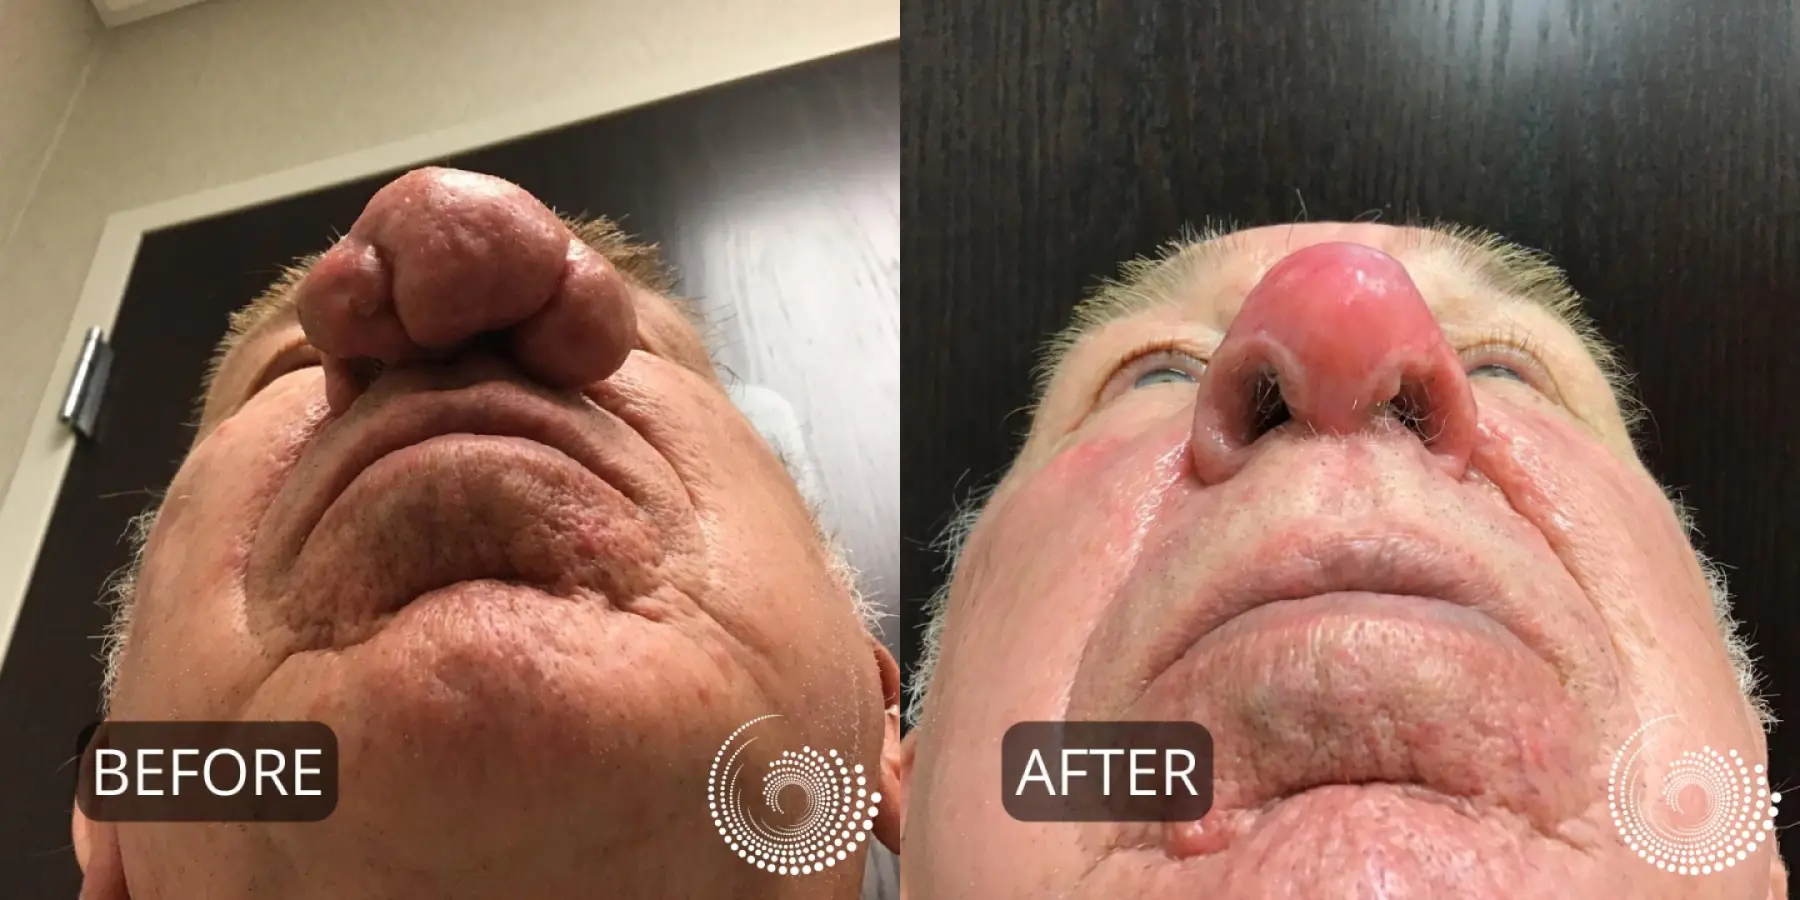 Rhinophyma treatment to reshape nose - Before and After 4